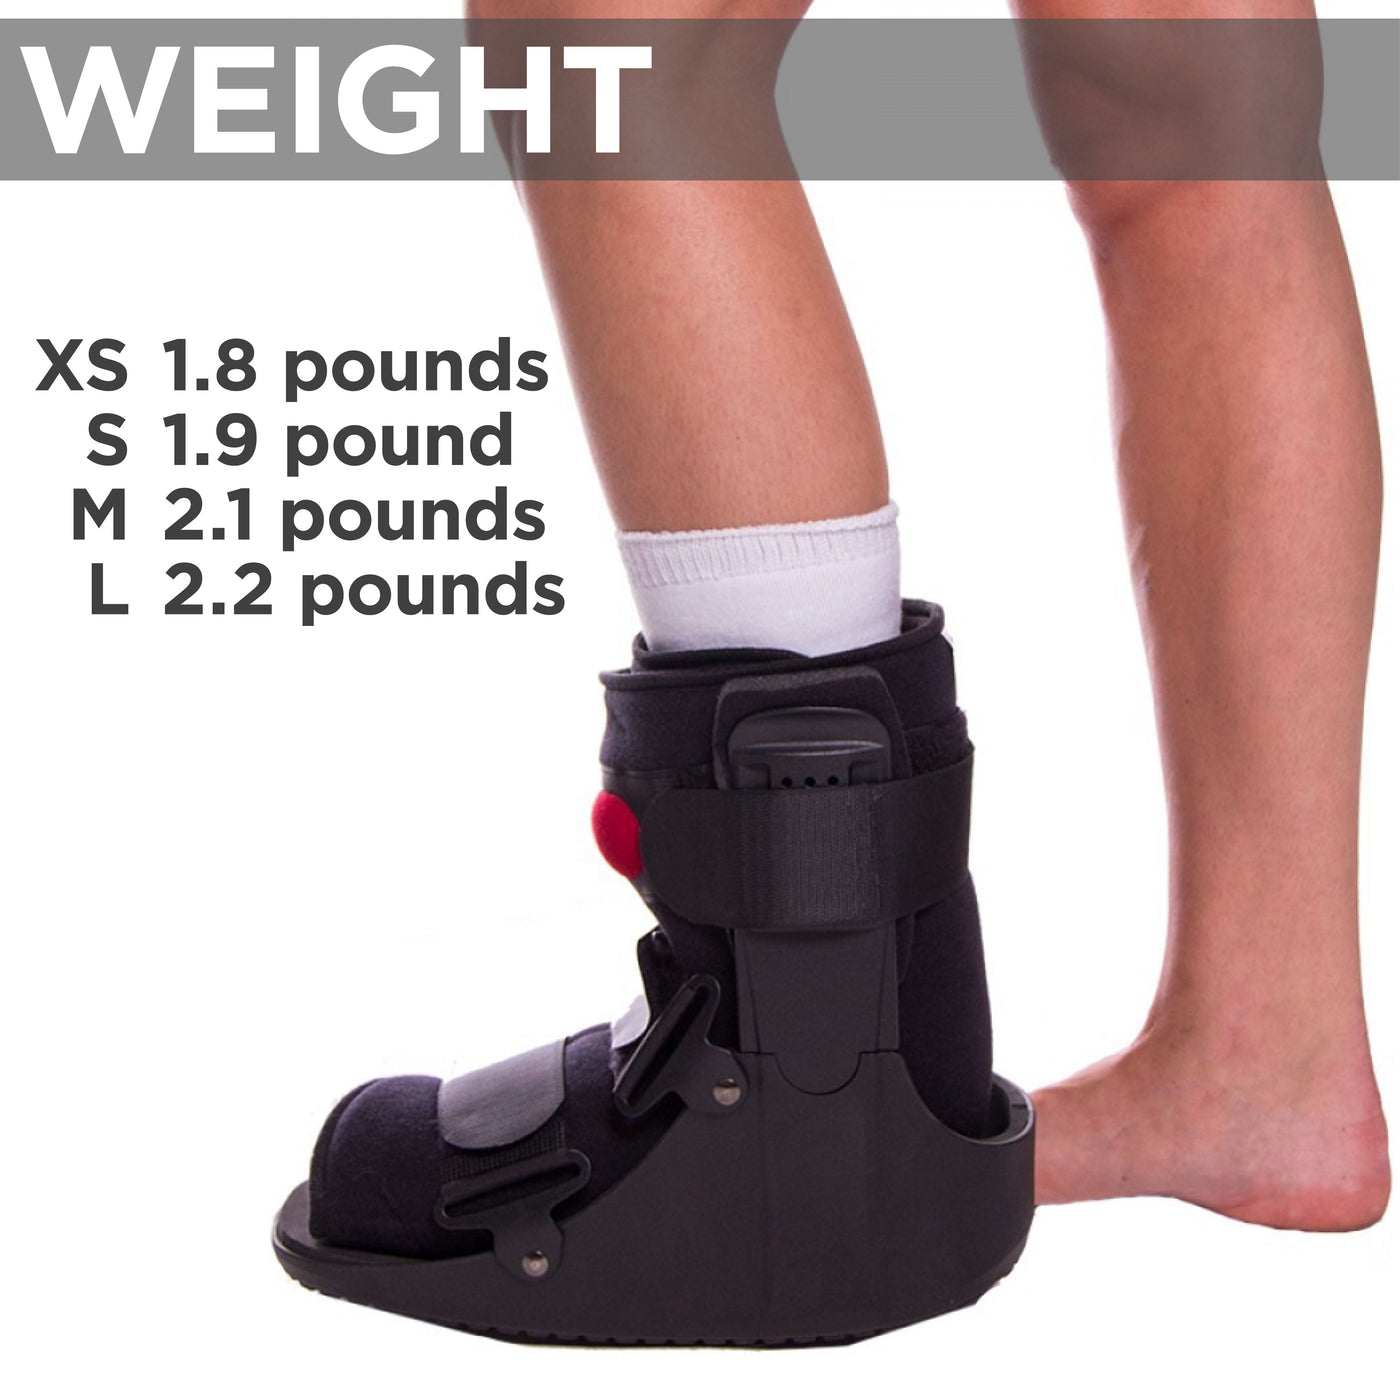  BraceAbility Short Air Walker Boot - Medical-Grade Orthopedic  Foot Cast Brace Air Cast Walking Boot for Broken Foot, Sprained Ankle,  Stress Fracture, Post Surgery, Achilles Tendon Injury (XS) : Health 